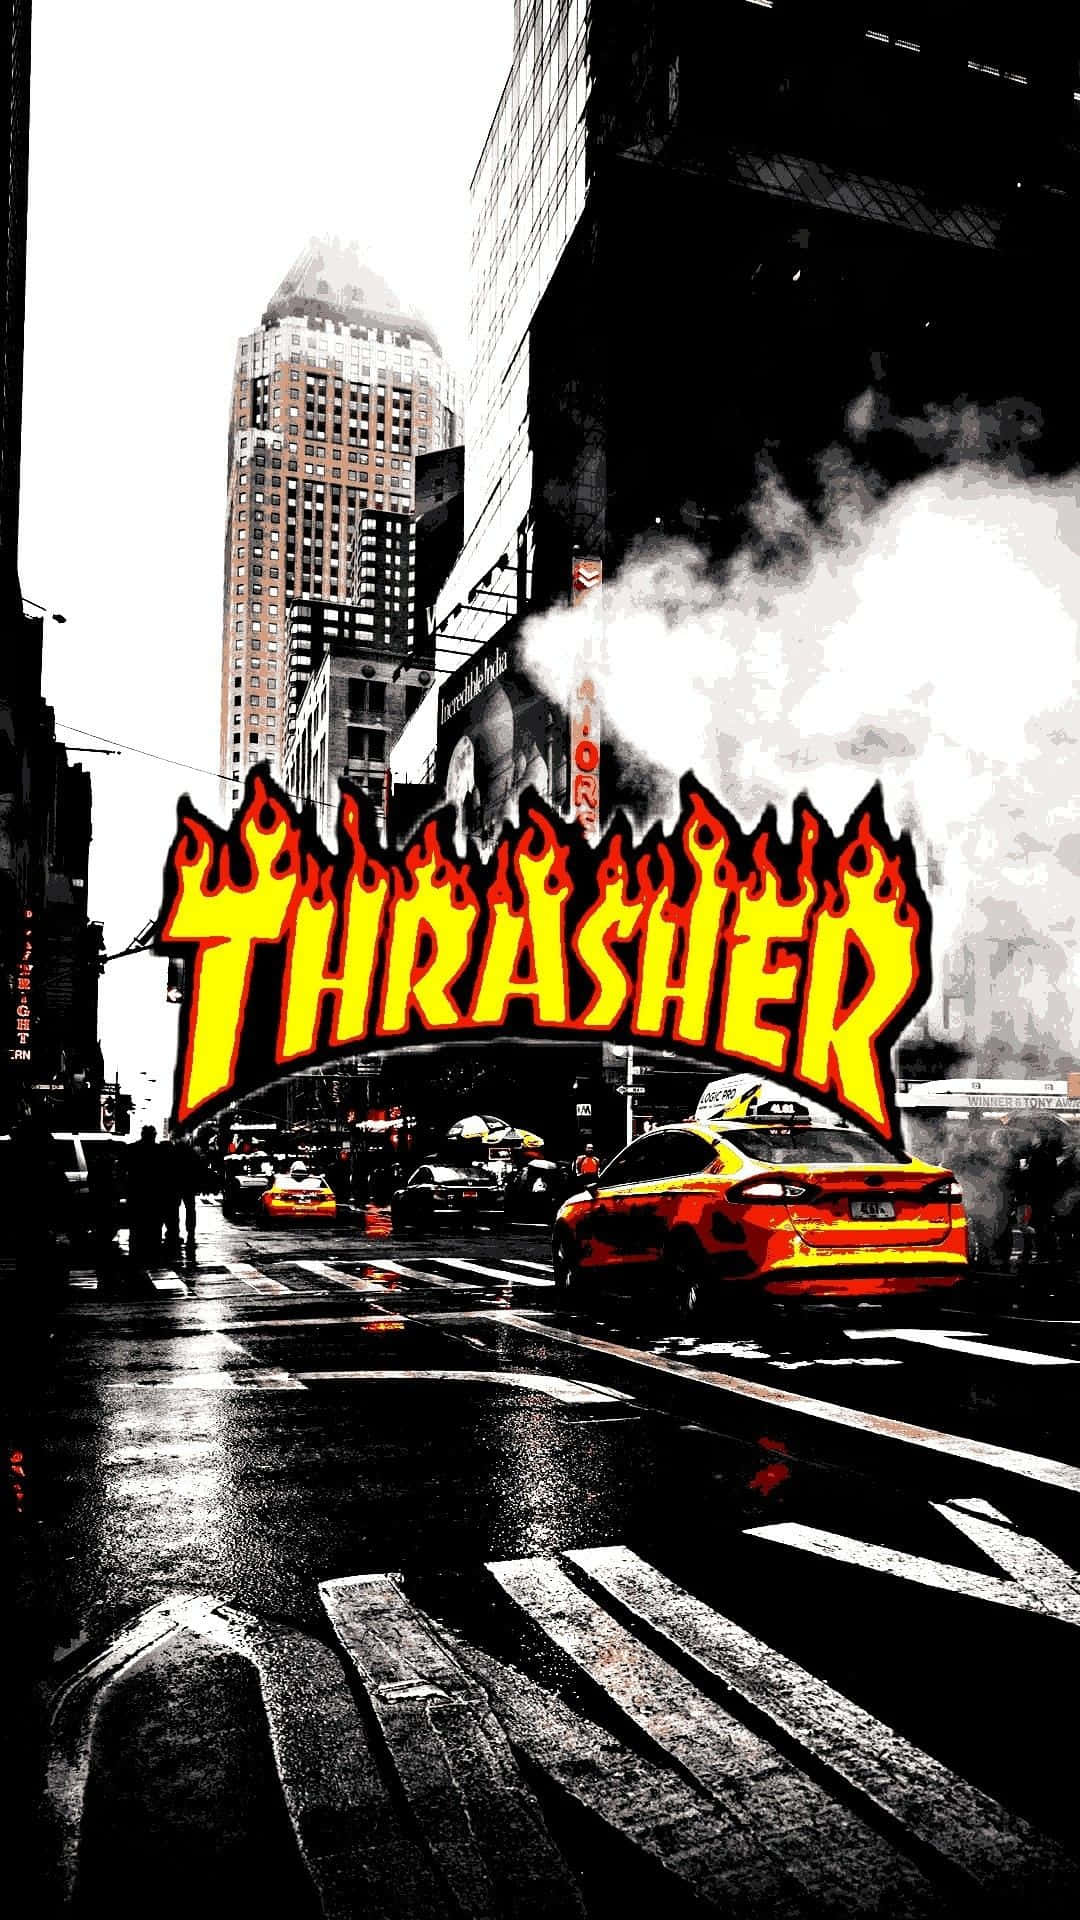 Represent Your Style with Thrasher